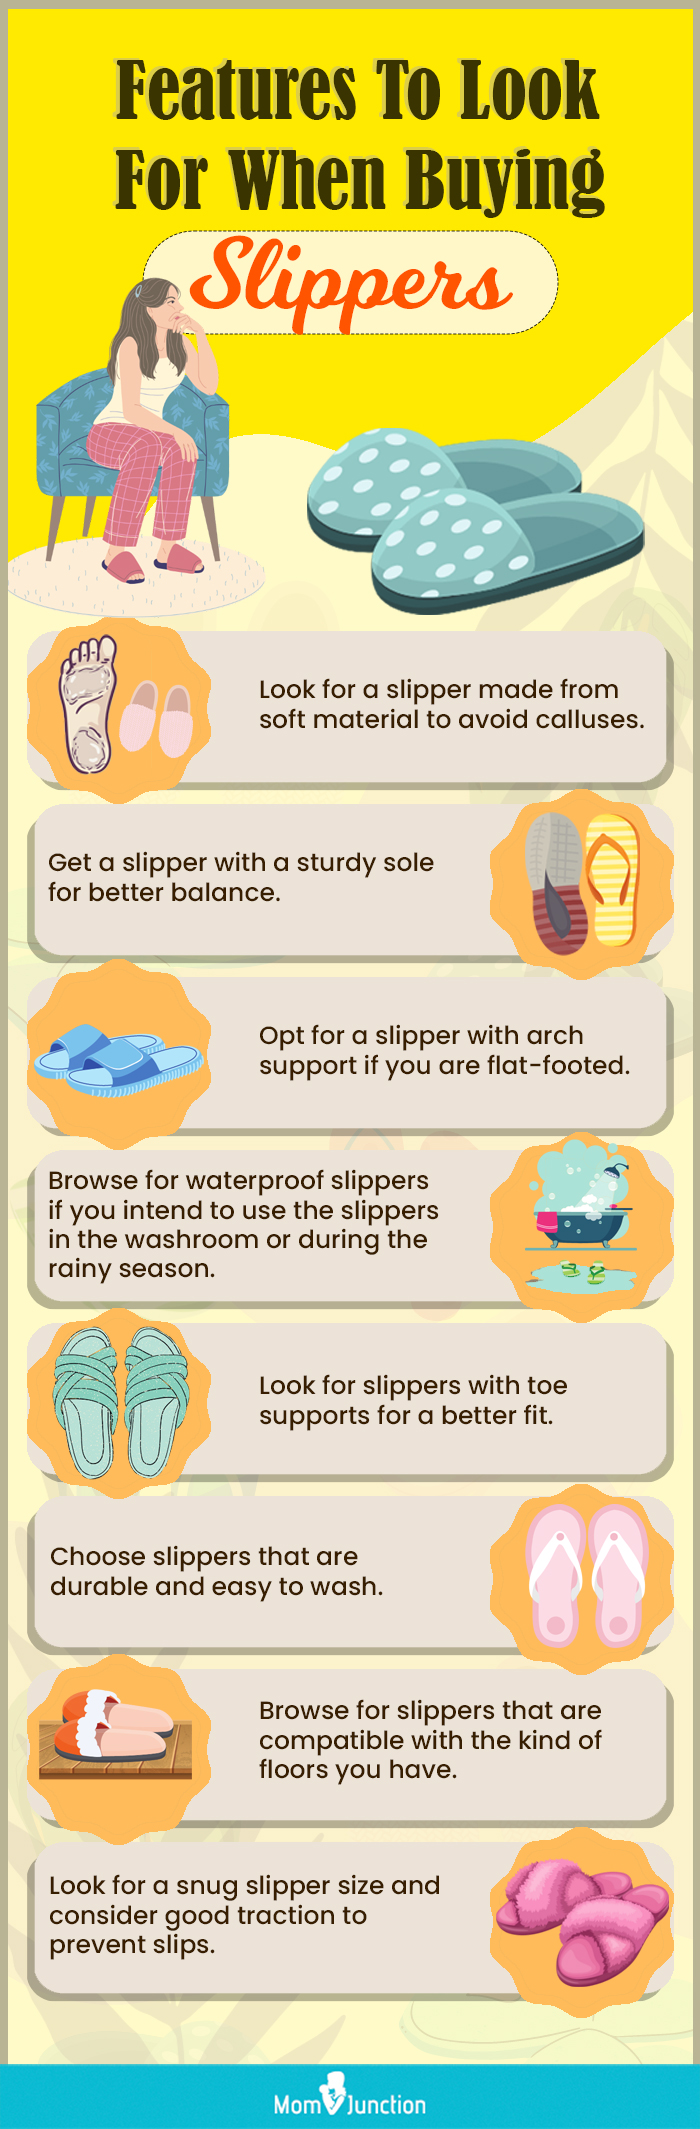 Features To Look For When Buying Slippers (Infographic)